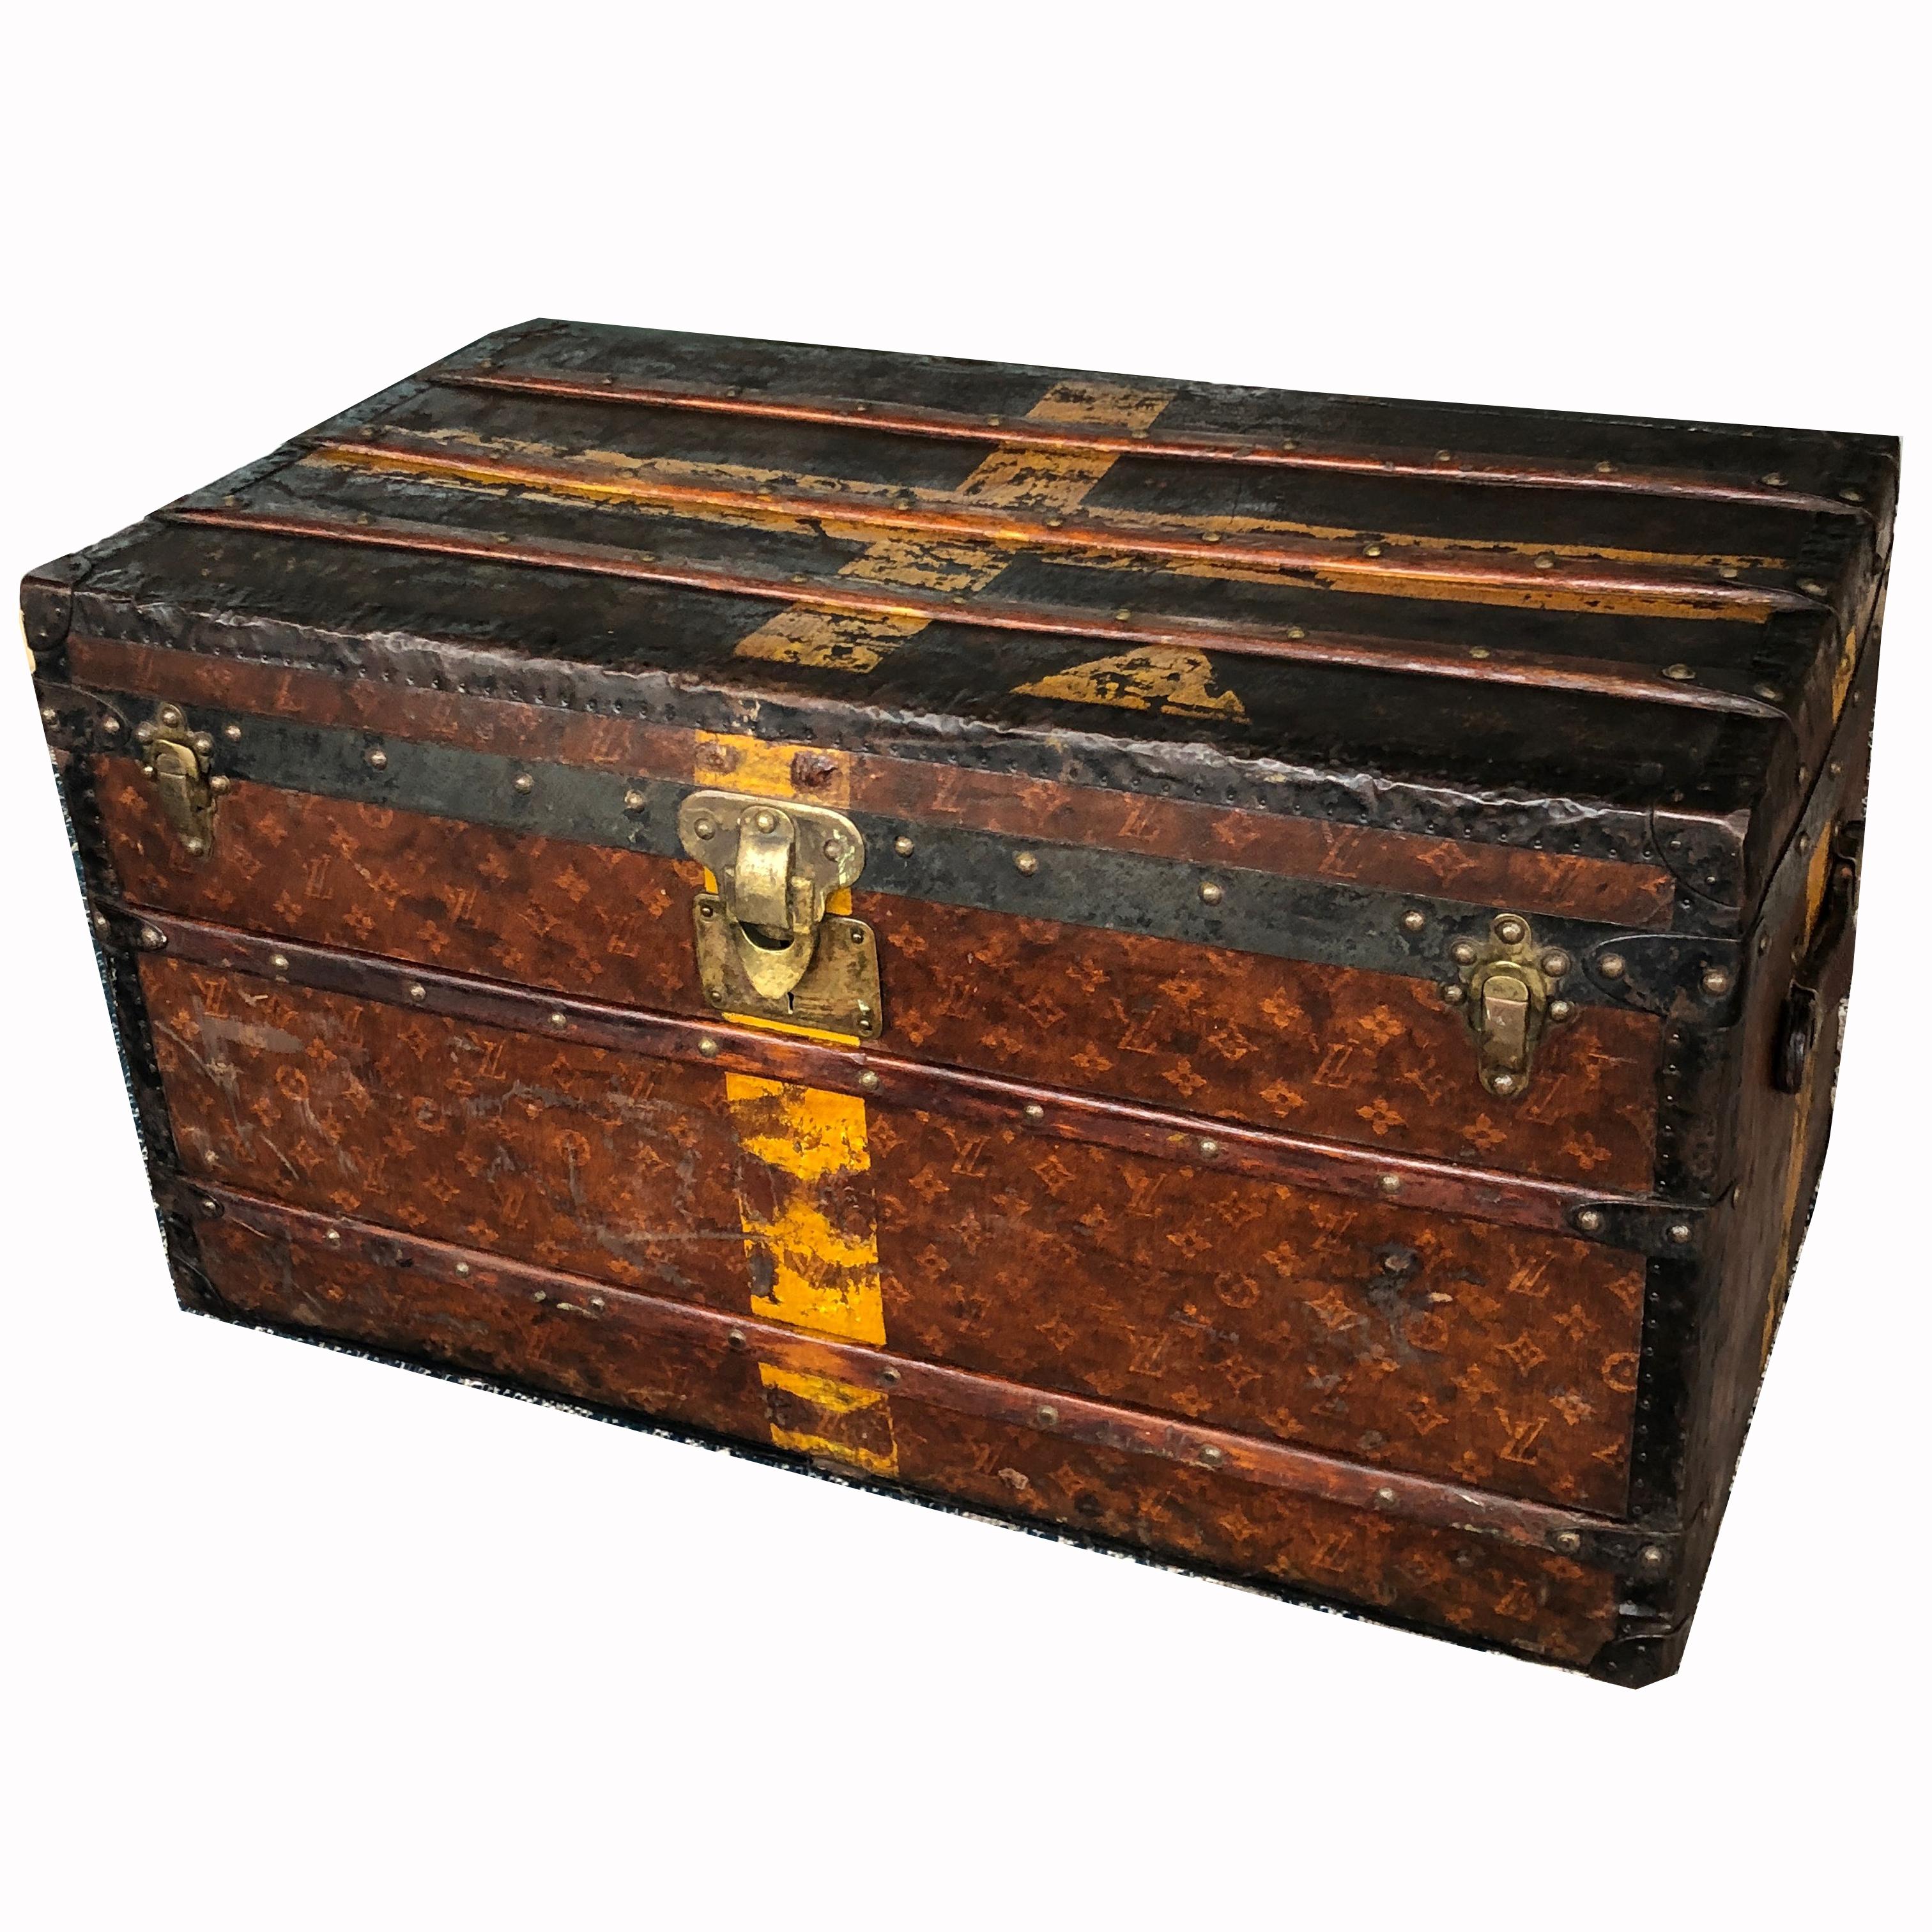 Authentic, antique Louis Vuitton monogram canvas steamer trunk from the early 20th C. Woven canvas, metal trim, leather handles with four wheels at the bottom. A key is included which still works to lock the primary latch. Three canvas & wood